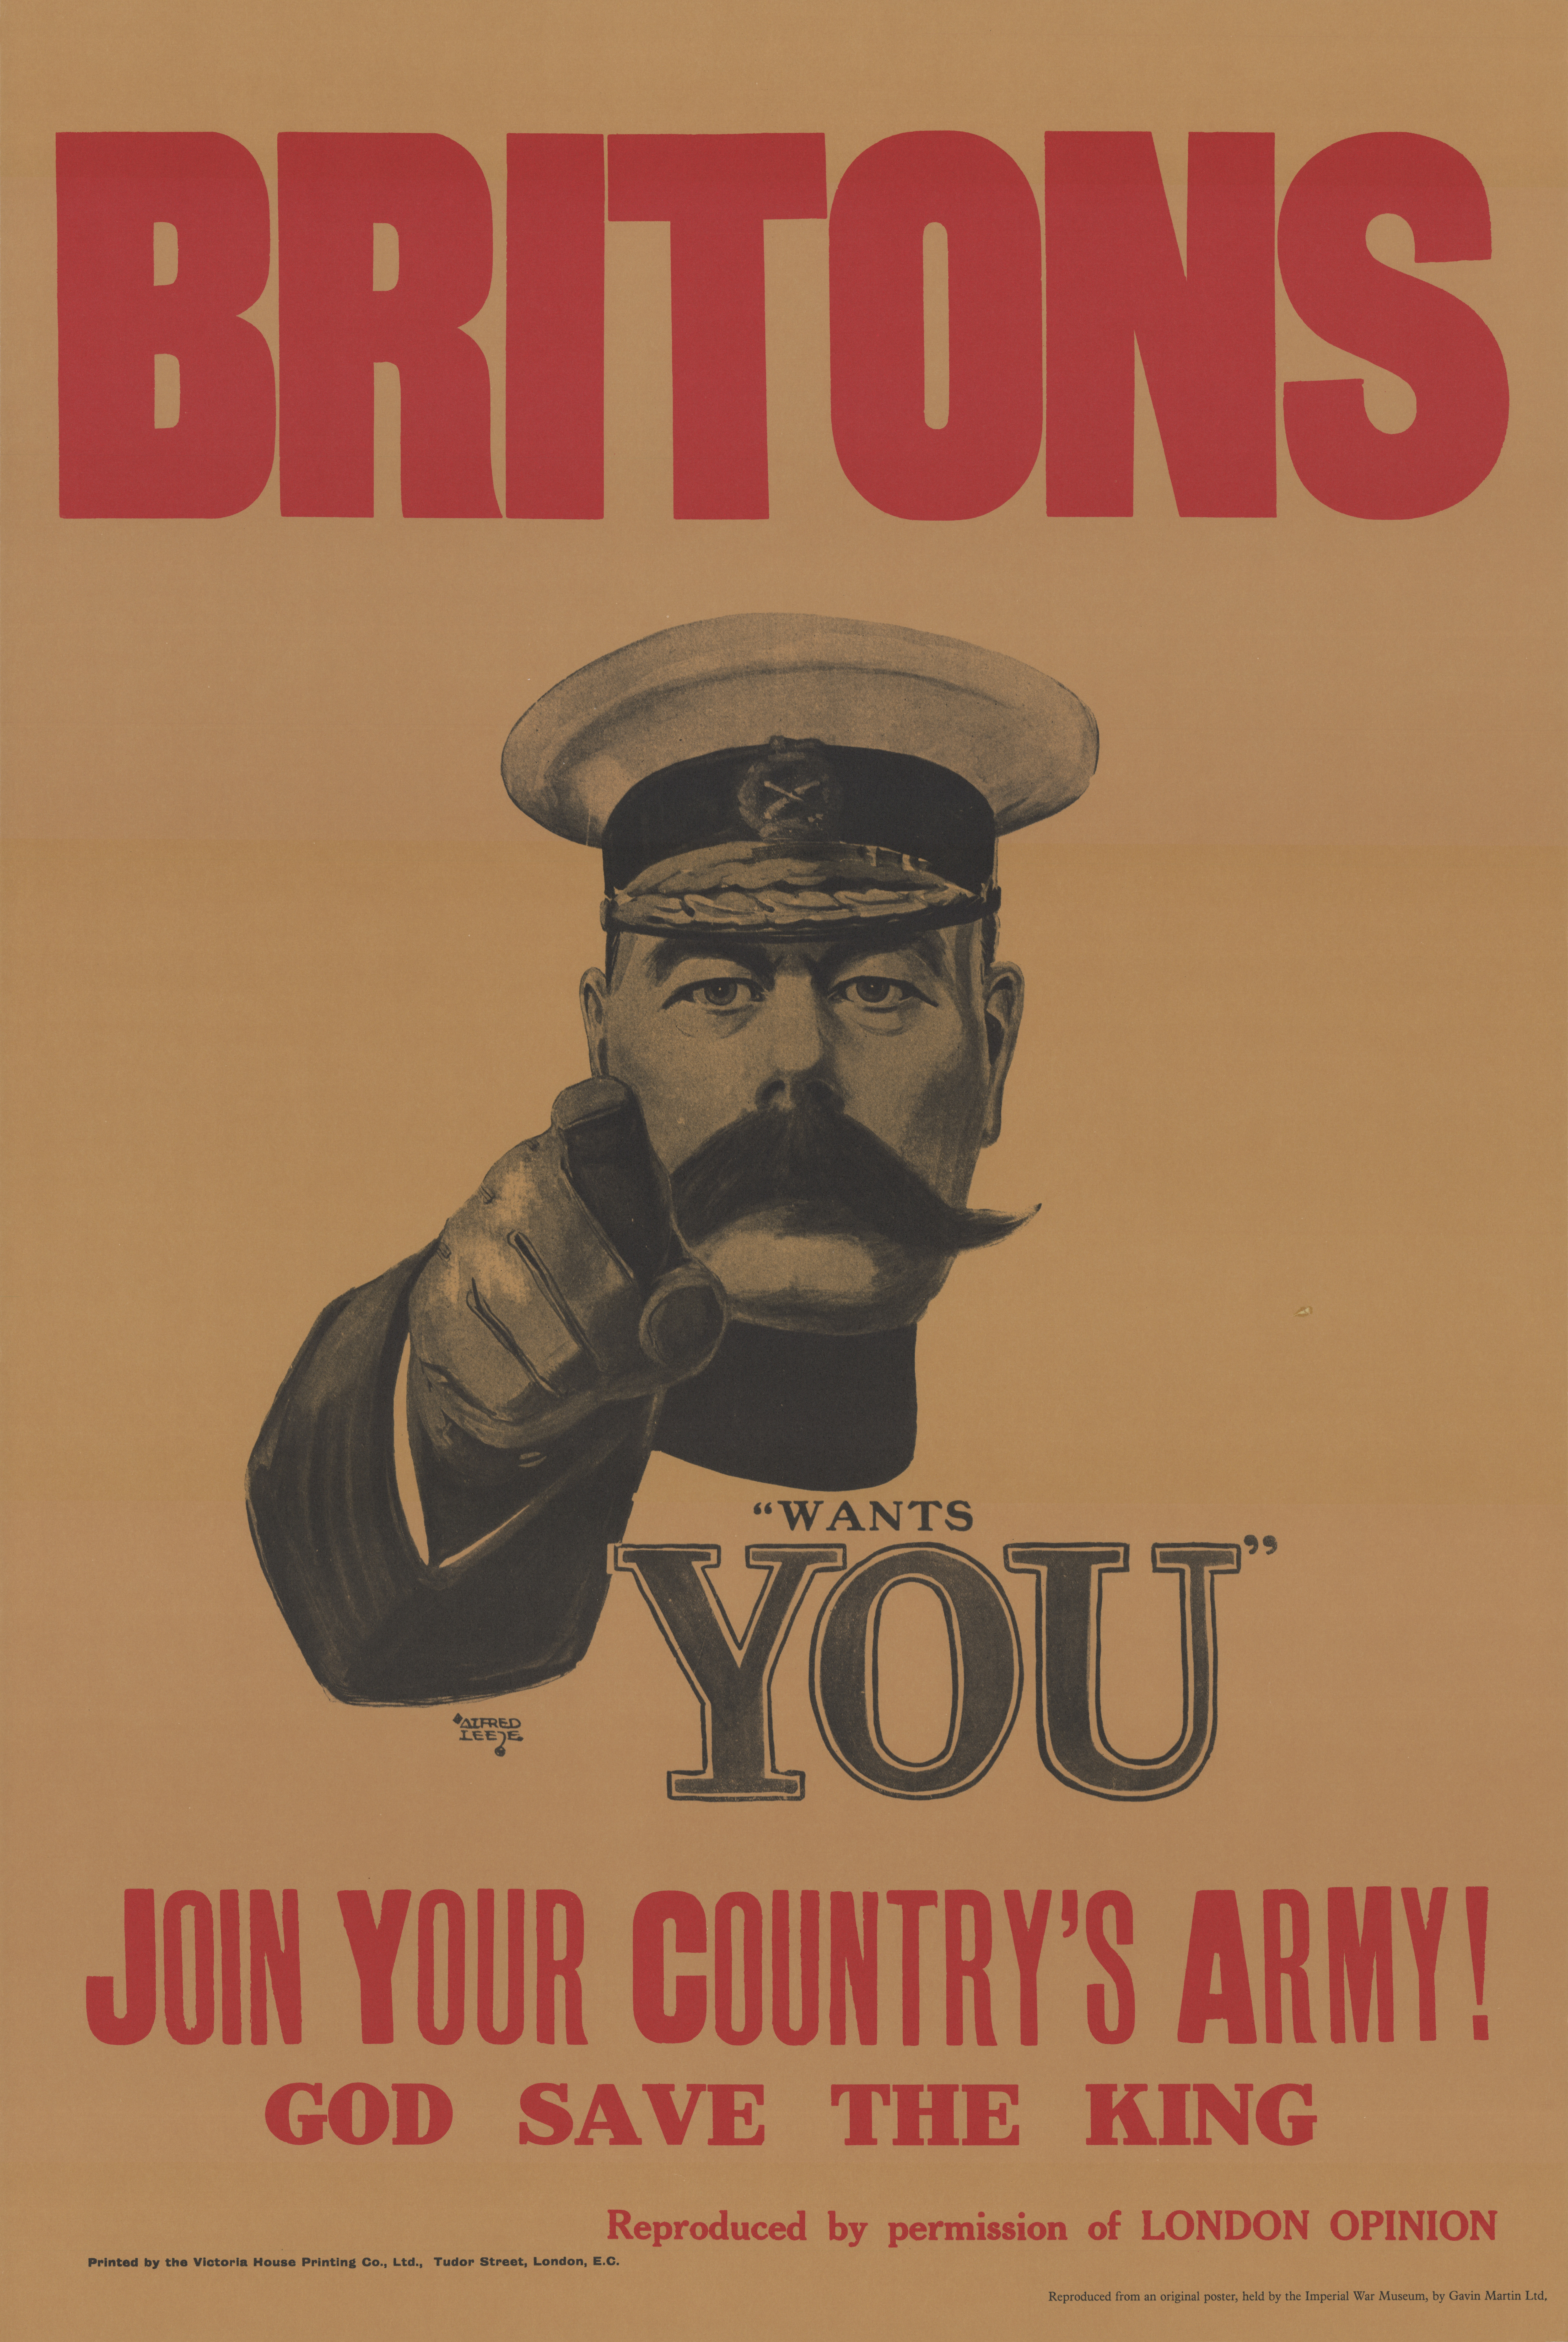 Army recruitment poster featuring Lord Kitchener